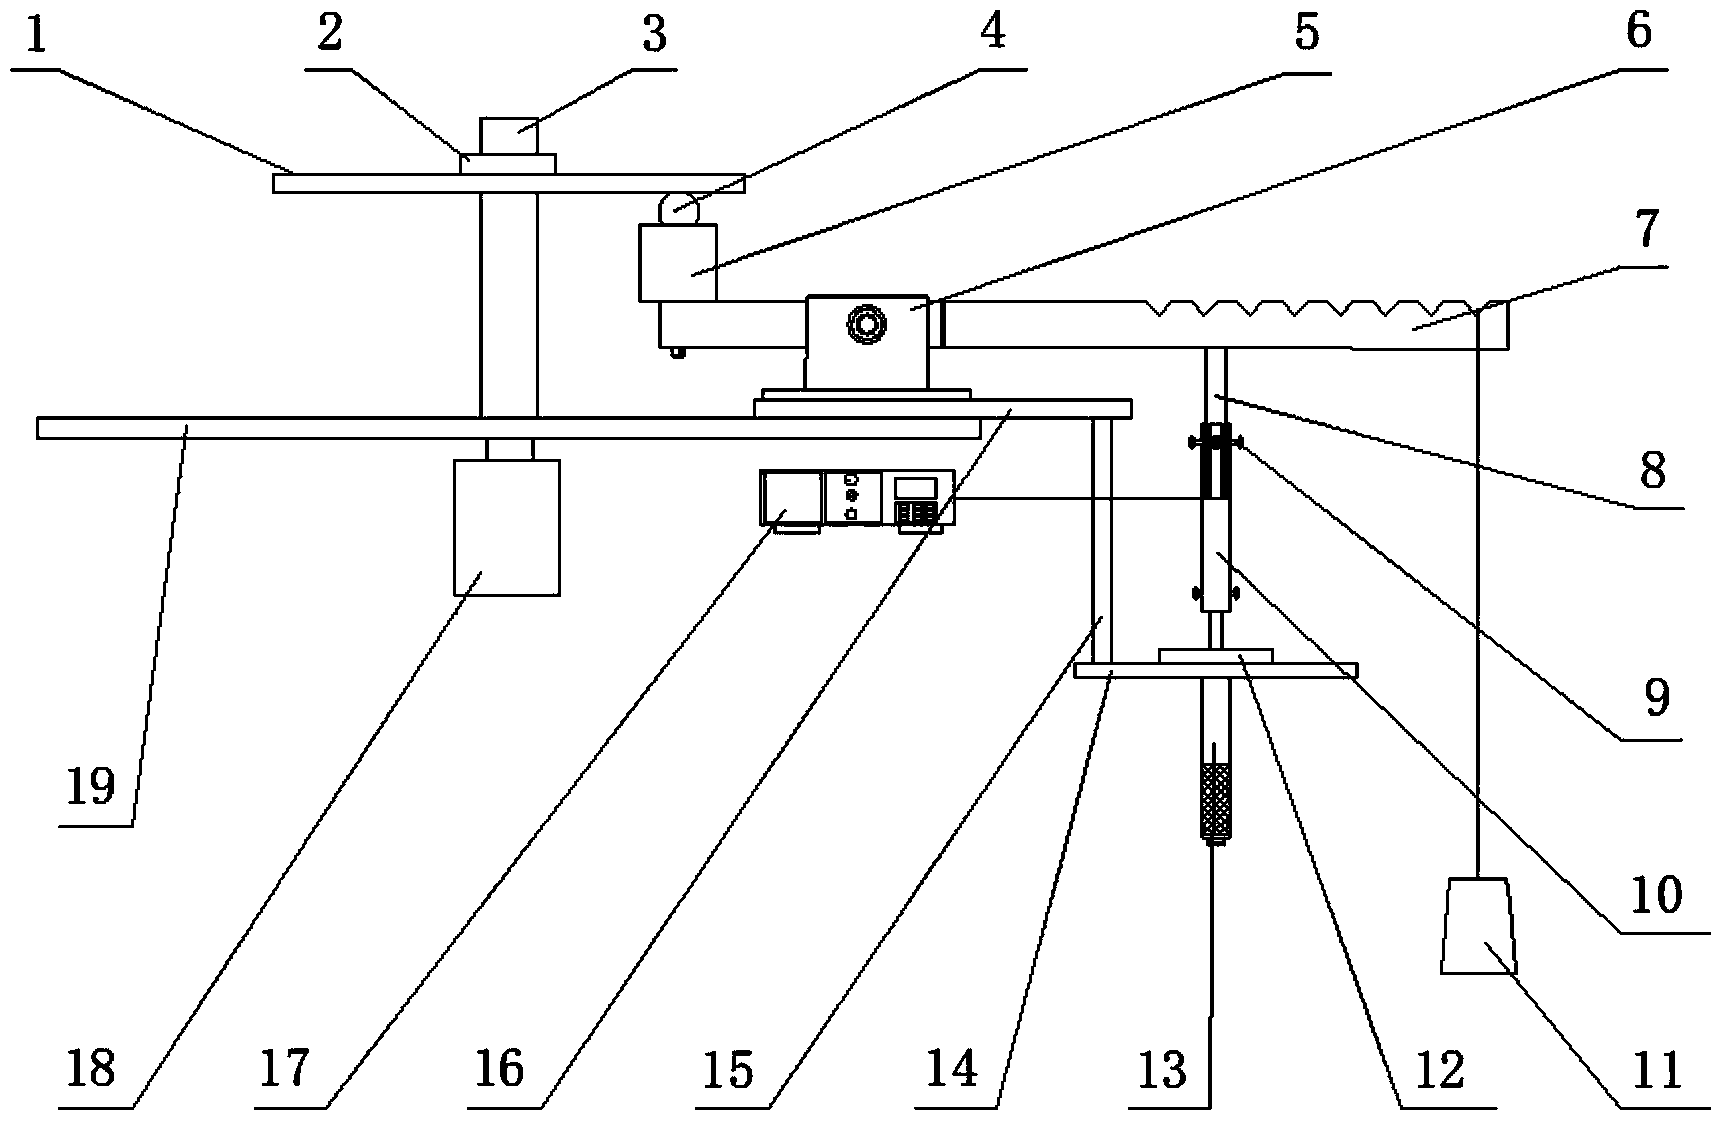 Friction experiment table for initiatively regulating and controlling thickness of lubricating film between friction pair